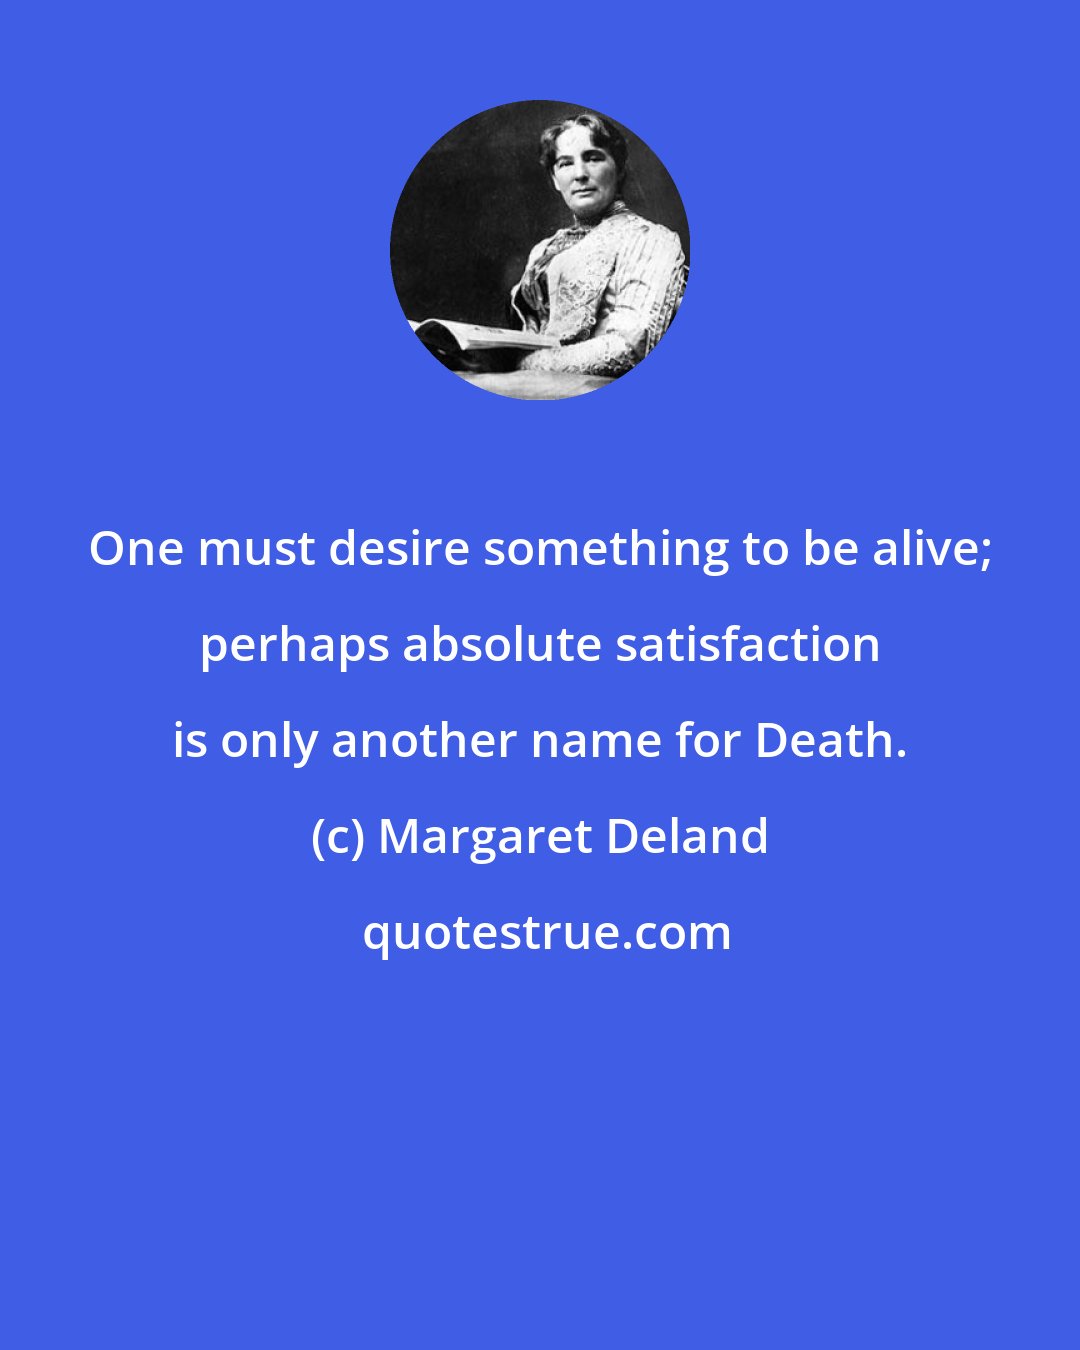 Margaret Deland: One must desire something to be alive; perhaps absolute satisfaction is only another name for Death.